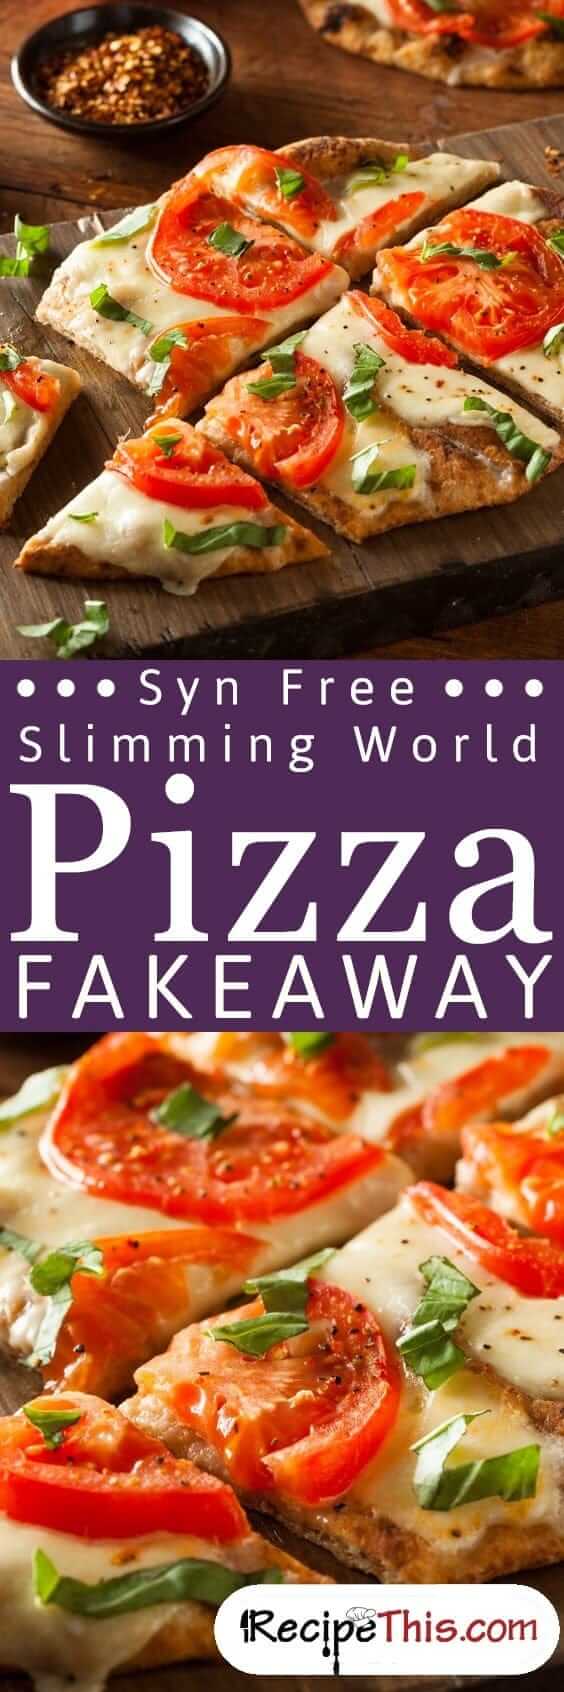 Syn Free Slimming World Fakeaway From RecipeThis.com